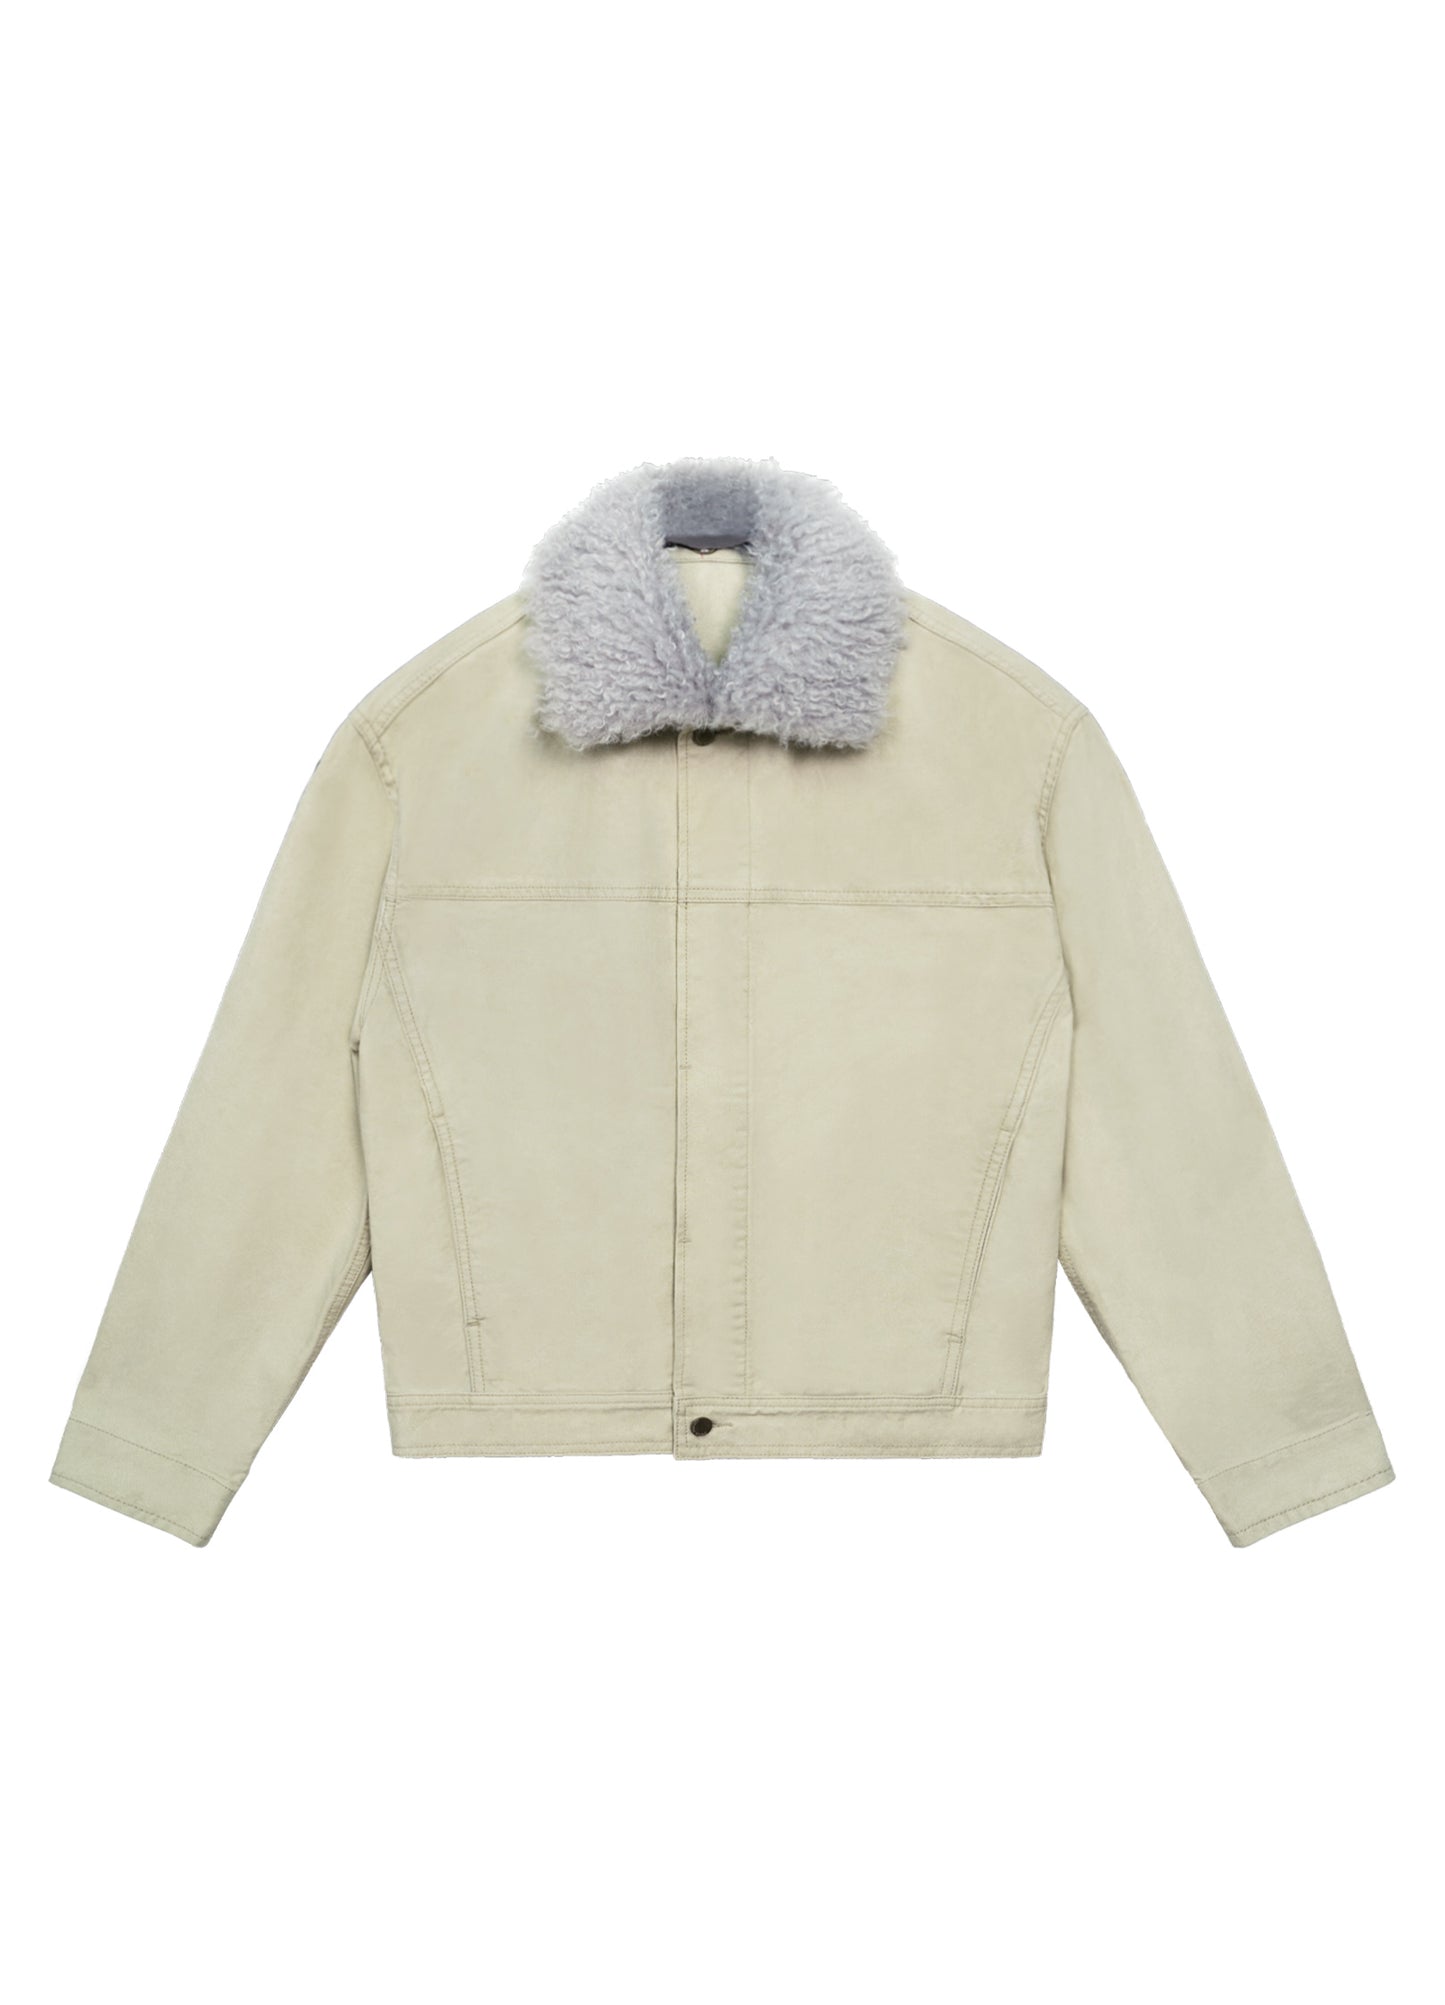 Removable Shearling Work Jacket